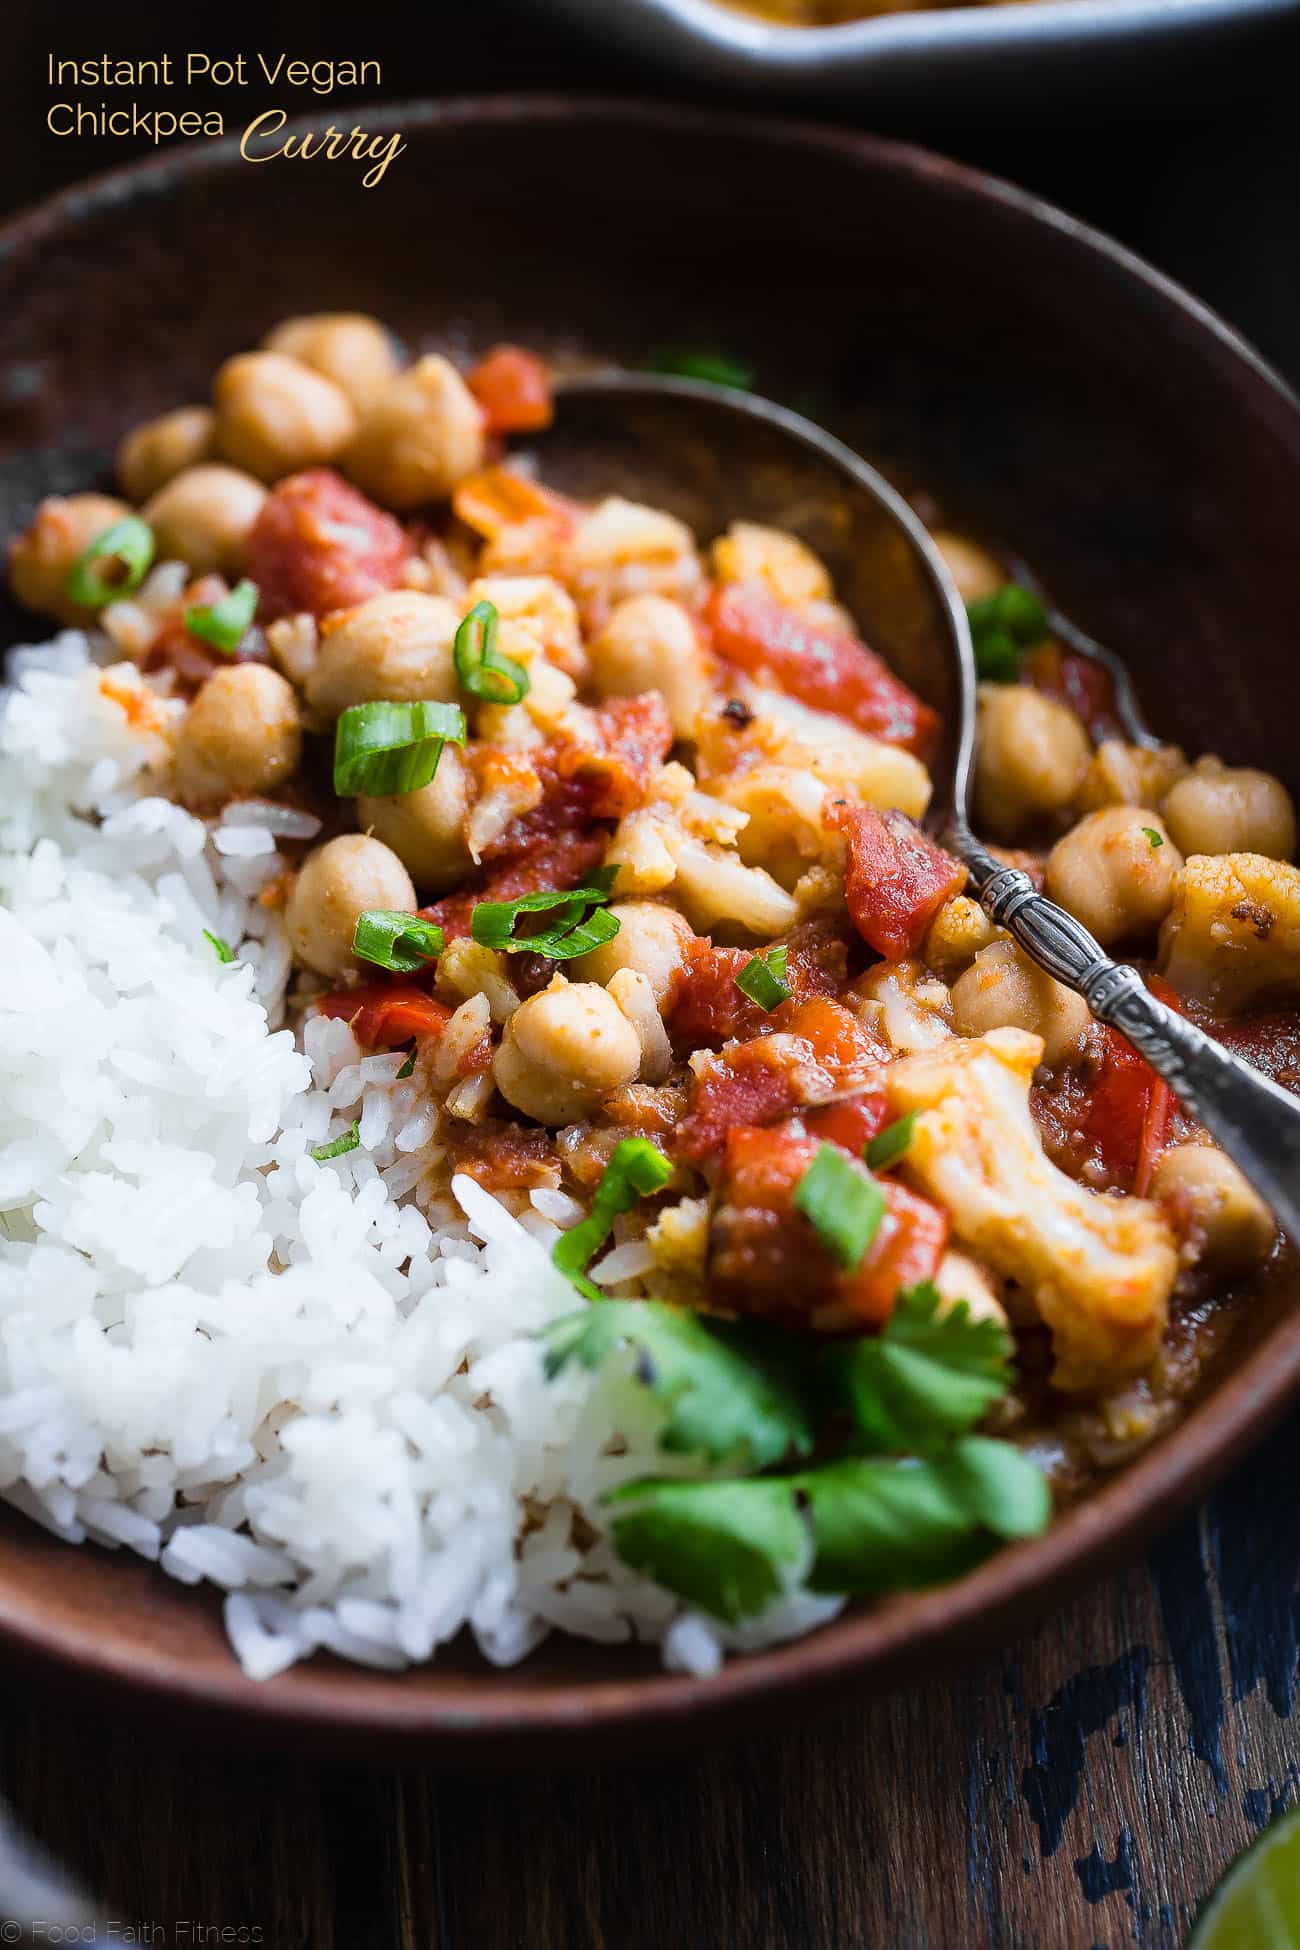 Instant Pot Easy Vegan Cauliflower Chickpea Curry - This easy chickpea curry is made in the Instant Pot and ready in 20 mins! It uses coconut milk and tomatoes to make it thick and so creamy! Makes great leftovers and is great for meal prep! | Foodfaithfitness.com | @FoodFaithFit